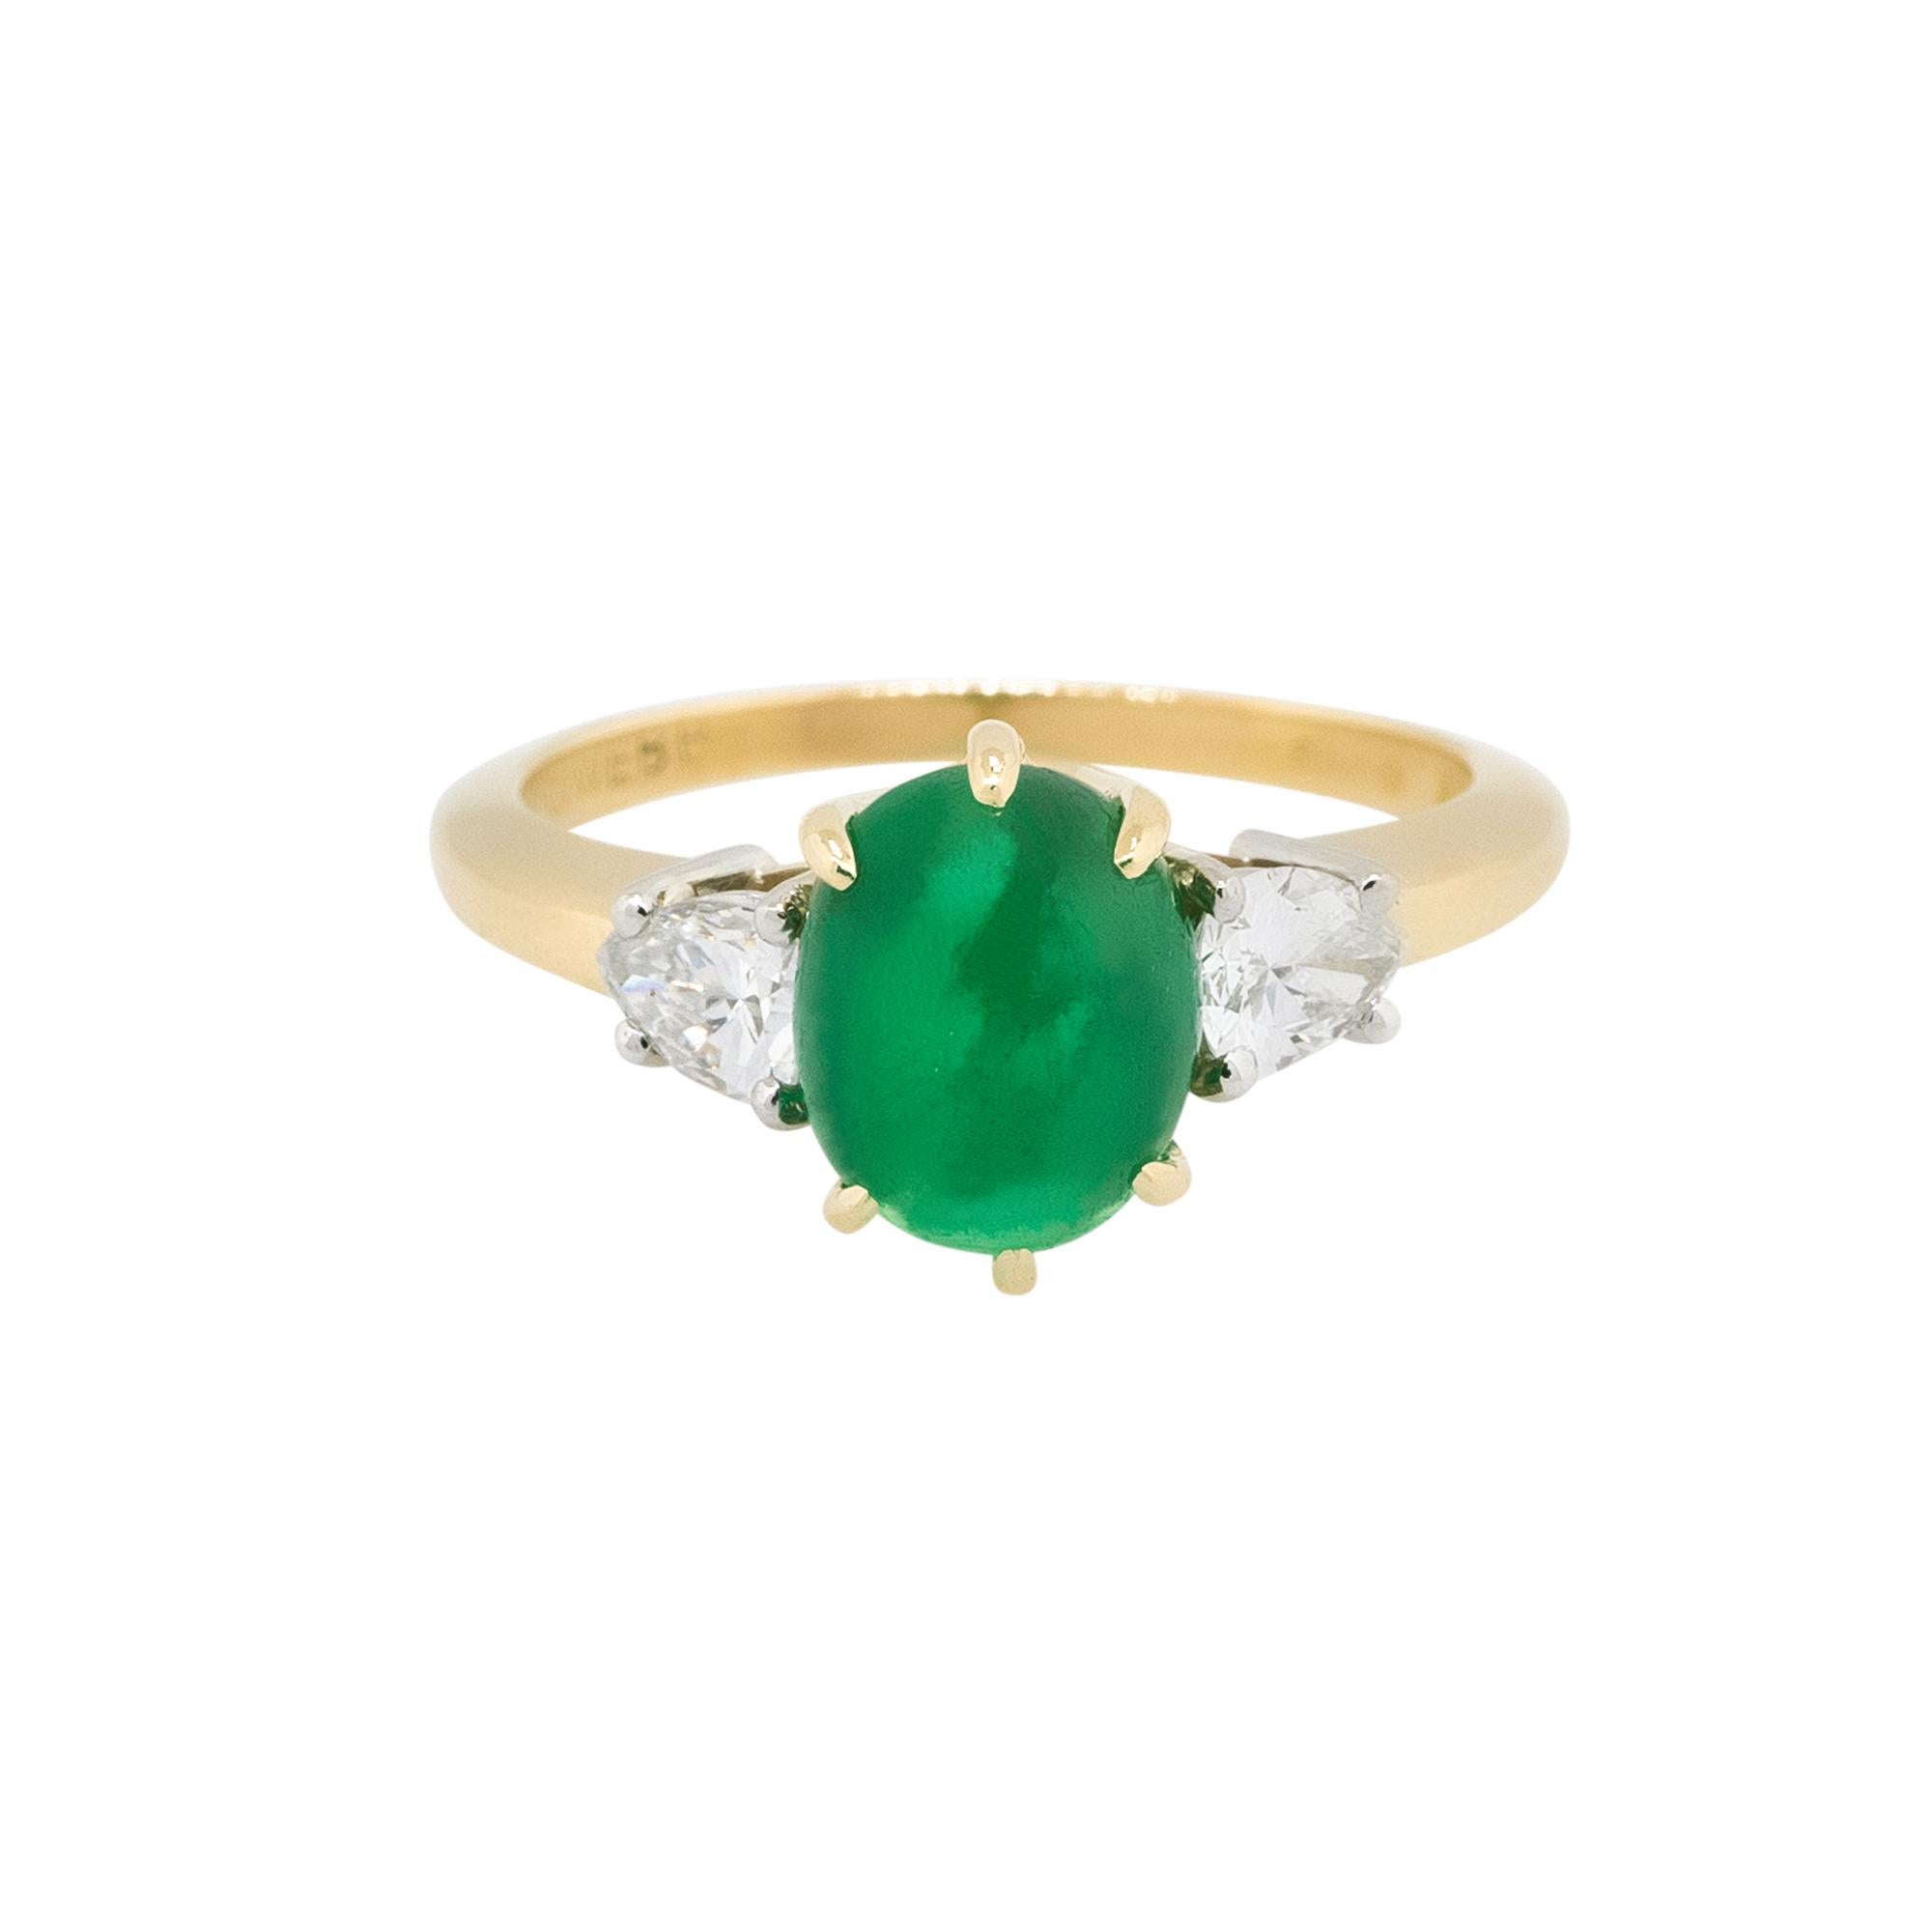 Material: 18k Yellow Gold
Diamond Details: Approx. 0.45ctw of pear shaped Diamonds. Diamonds are G/H in color and VS in clarity
Gemstone Details: Oval shaped Emerald cabochon
Ring Size: 5.5
Total Weight: 3.9g (2.5dwt)
Measurements: 19.40mm x 9.60mm